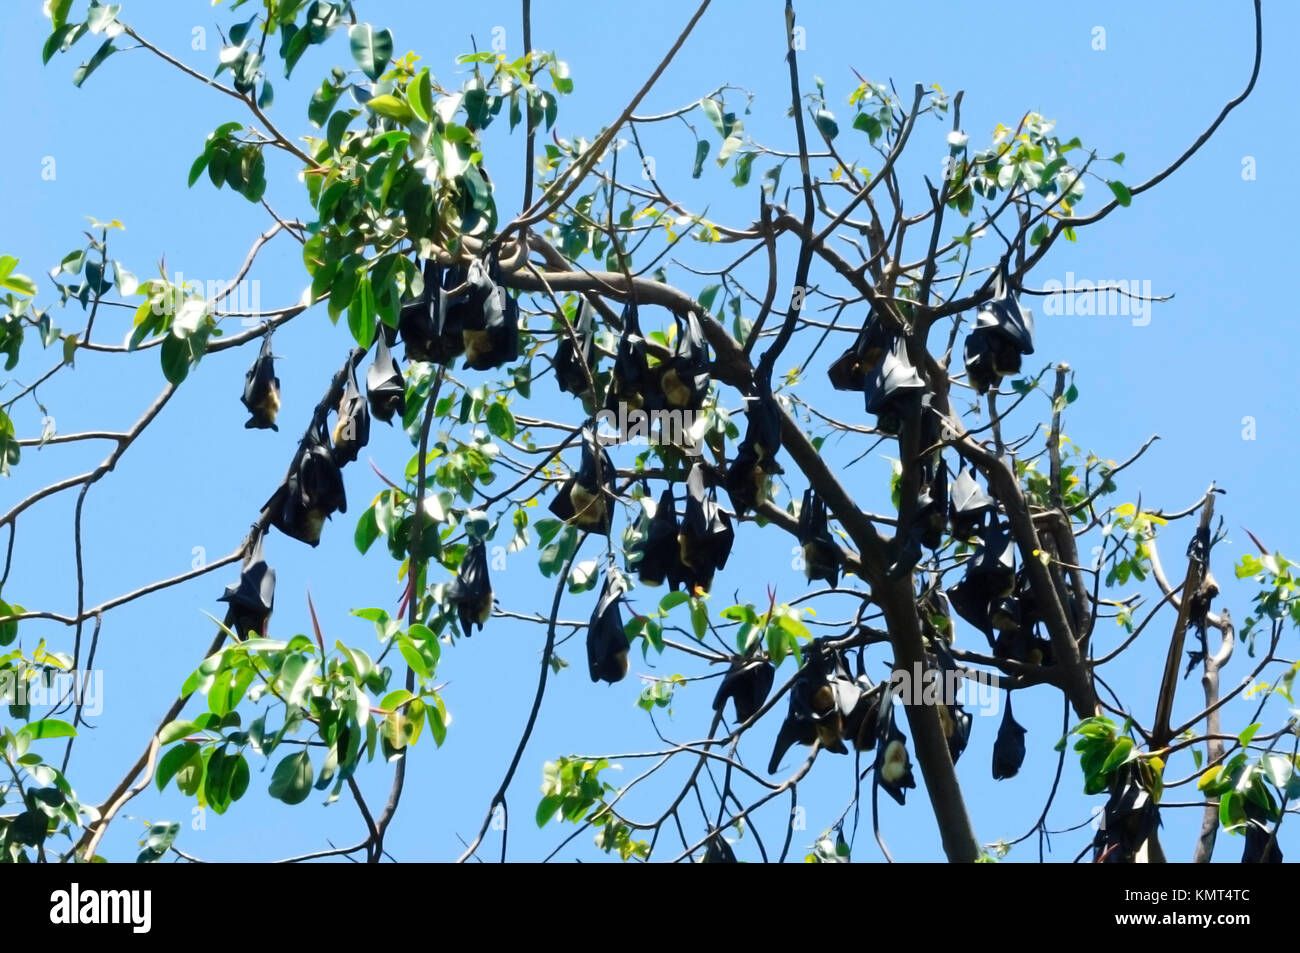 Colony of Spectacled flying fox or Spectacled Fruit Bat (Pteropus conspicillatus) Cairns Centre. It is a megabat that lives in Queensland, Australia Stock Photo